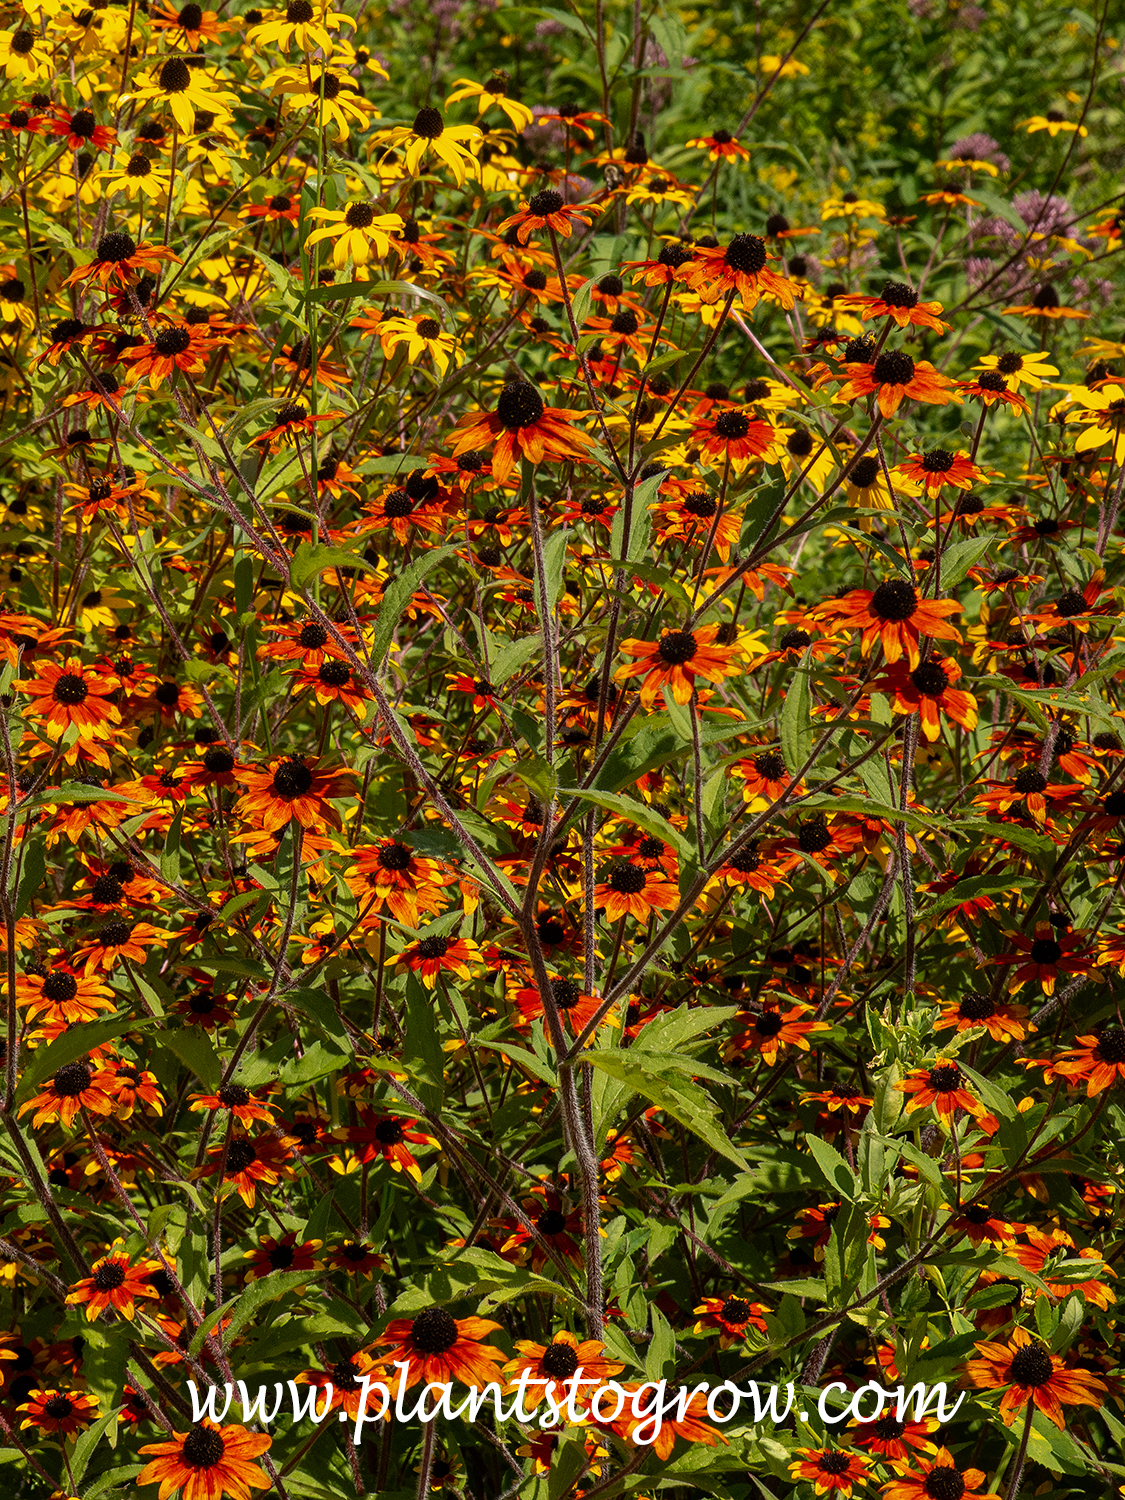 Prairie Glow Rudbeckia (Rudbeckia triloba) 
This displays the striking burnt orange flowers that have prominent center cones.